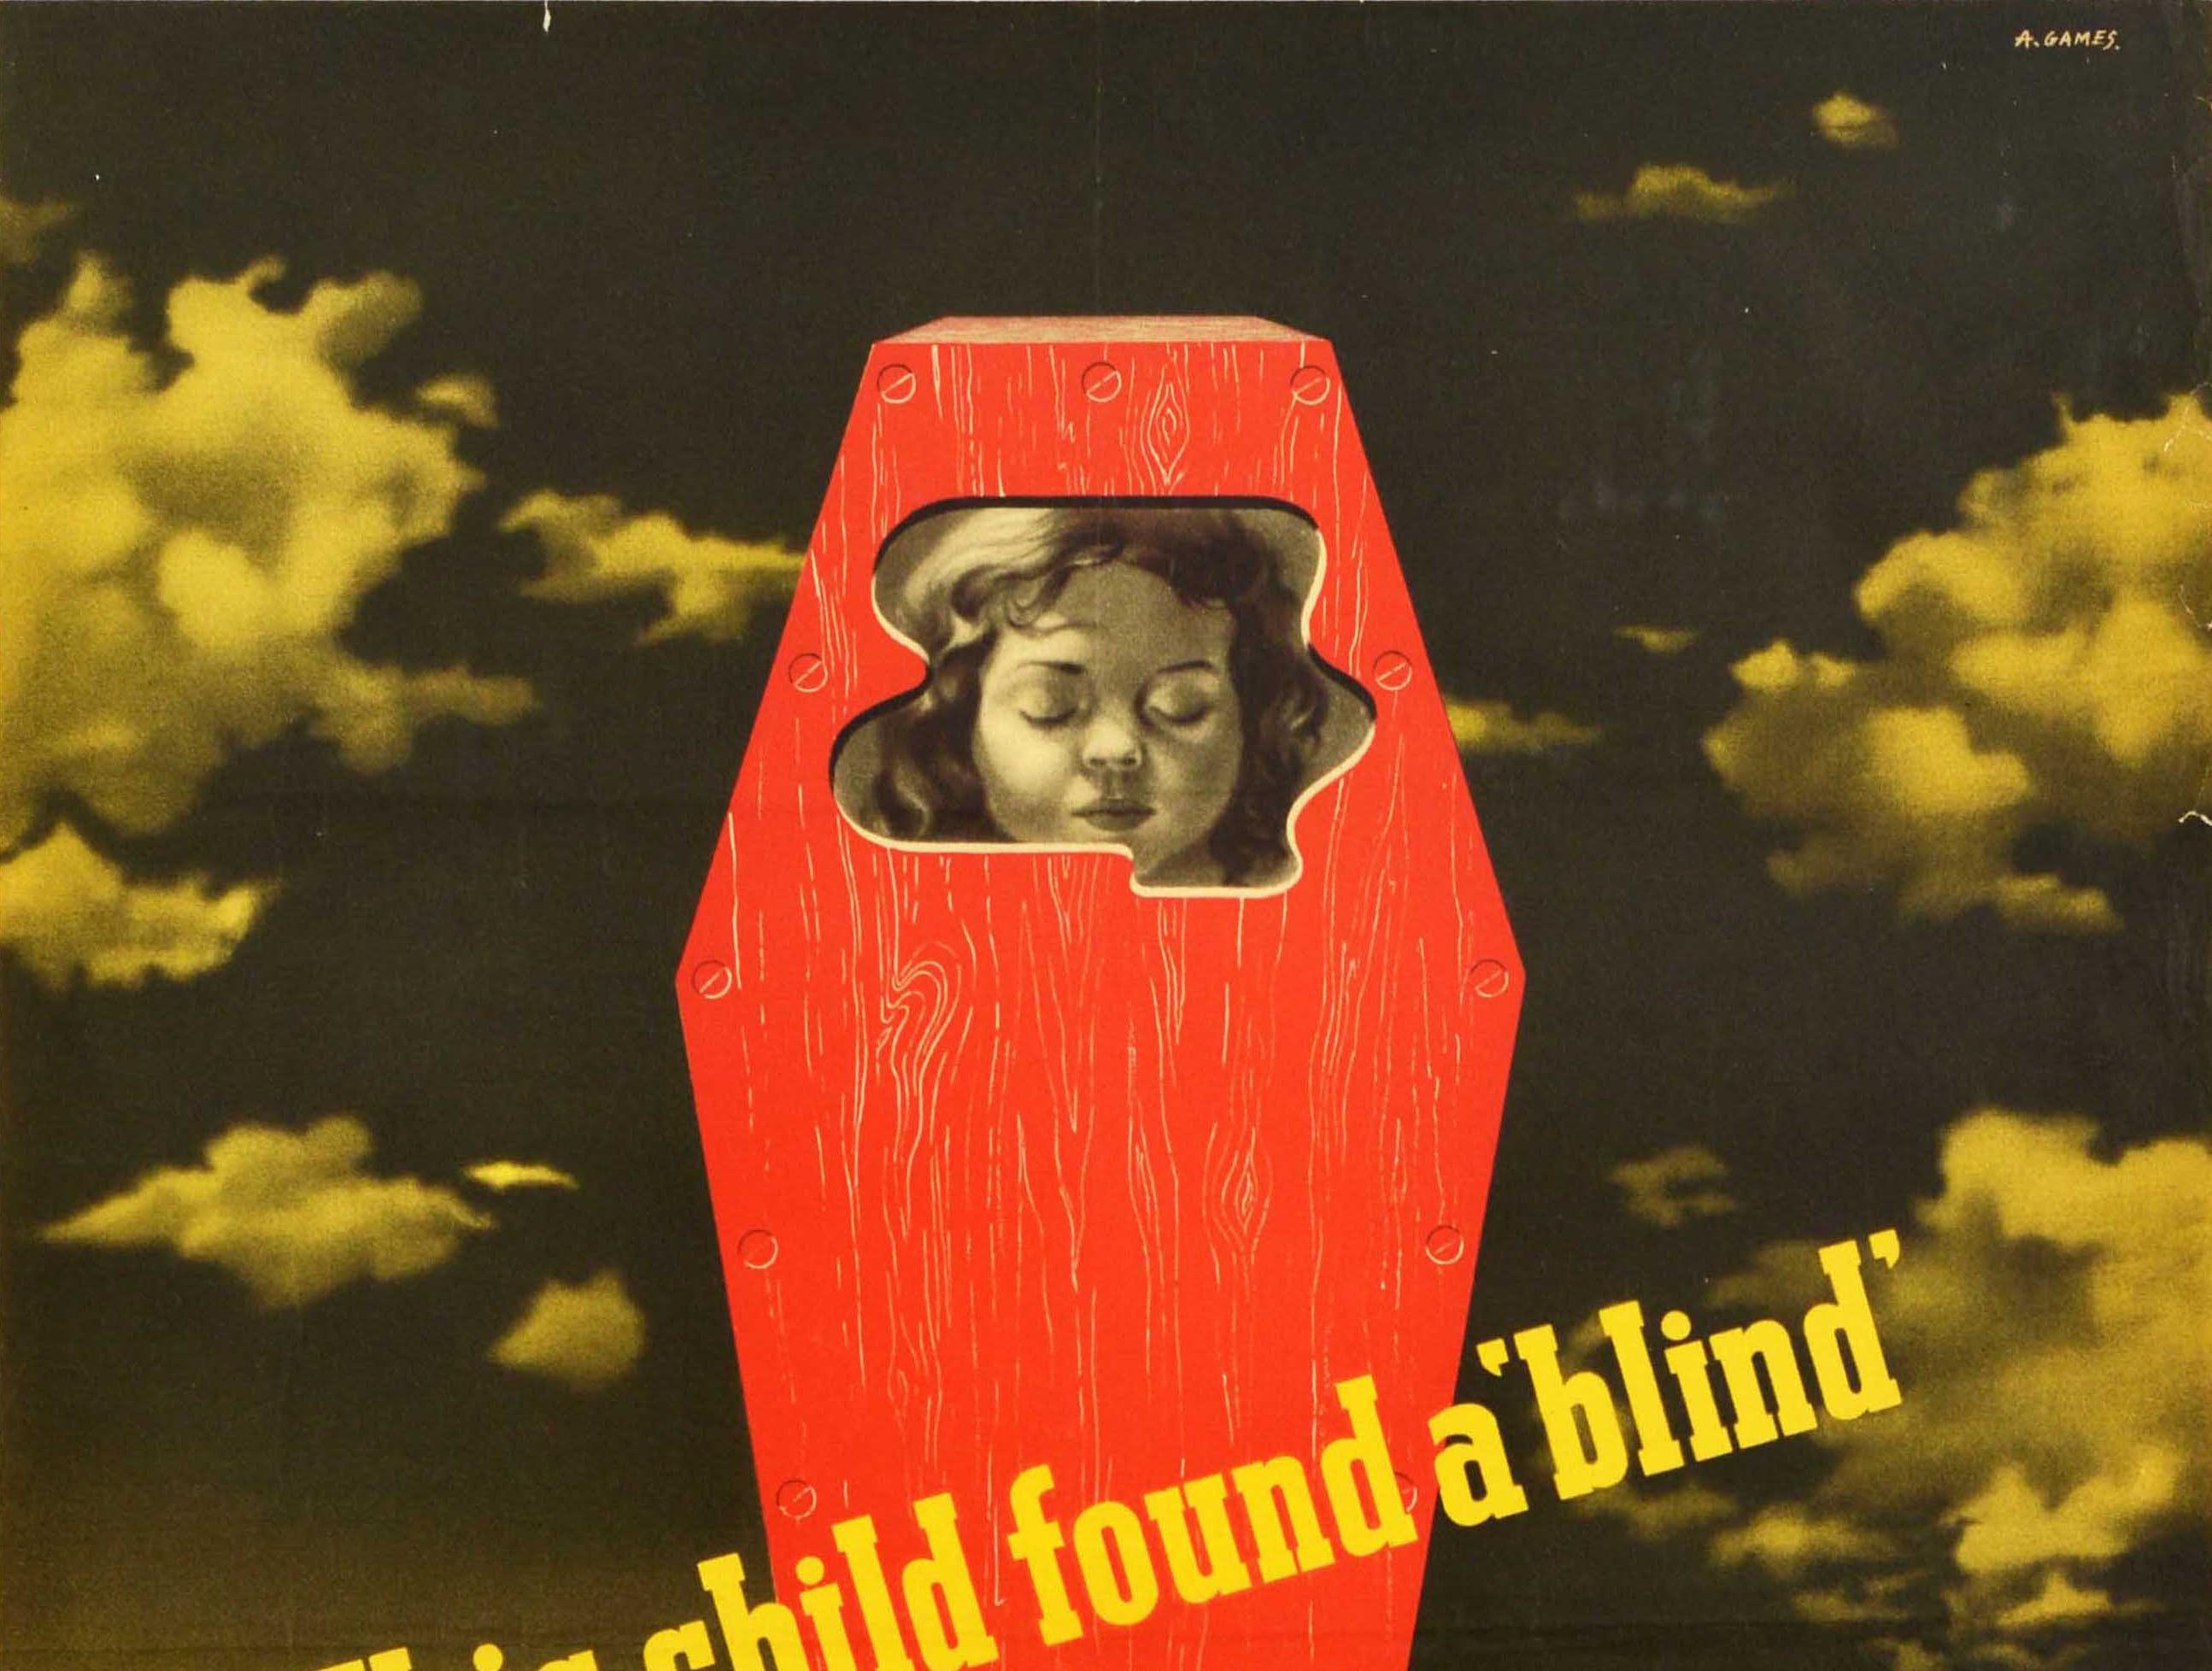 Original vintage World War Two bomb safety poster - This child found a 'blind' Accidents occur daily with blinds left on ranges Report all blinds for destruction at the end of the day's work - featuring a modernist design by the notable British